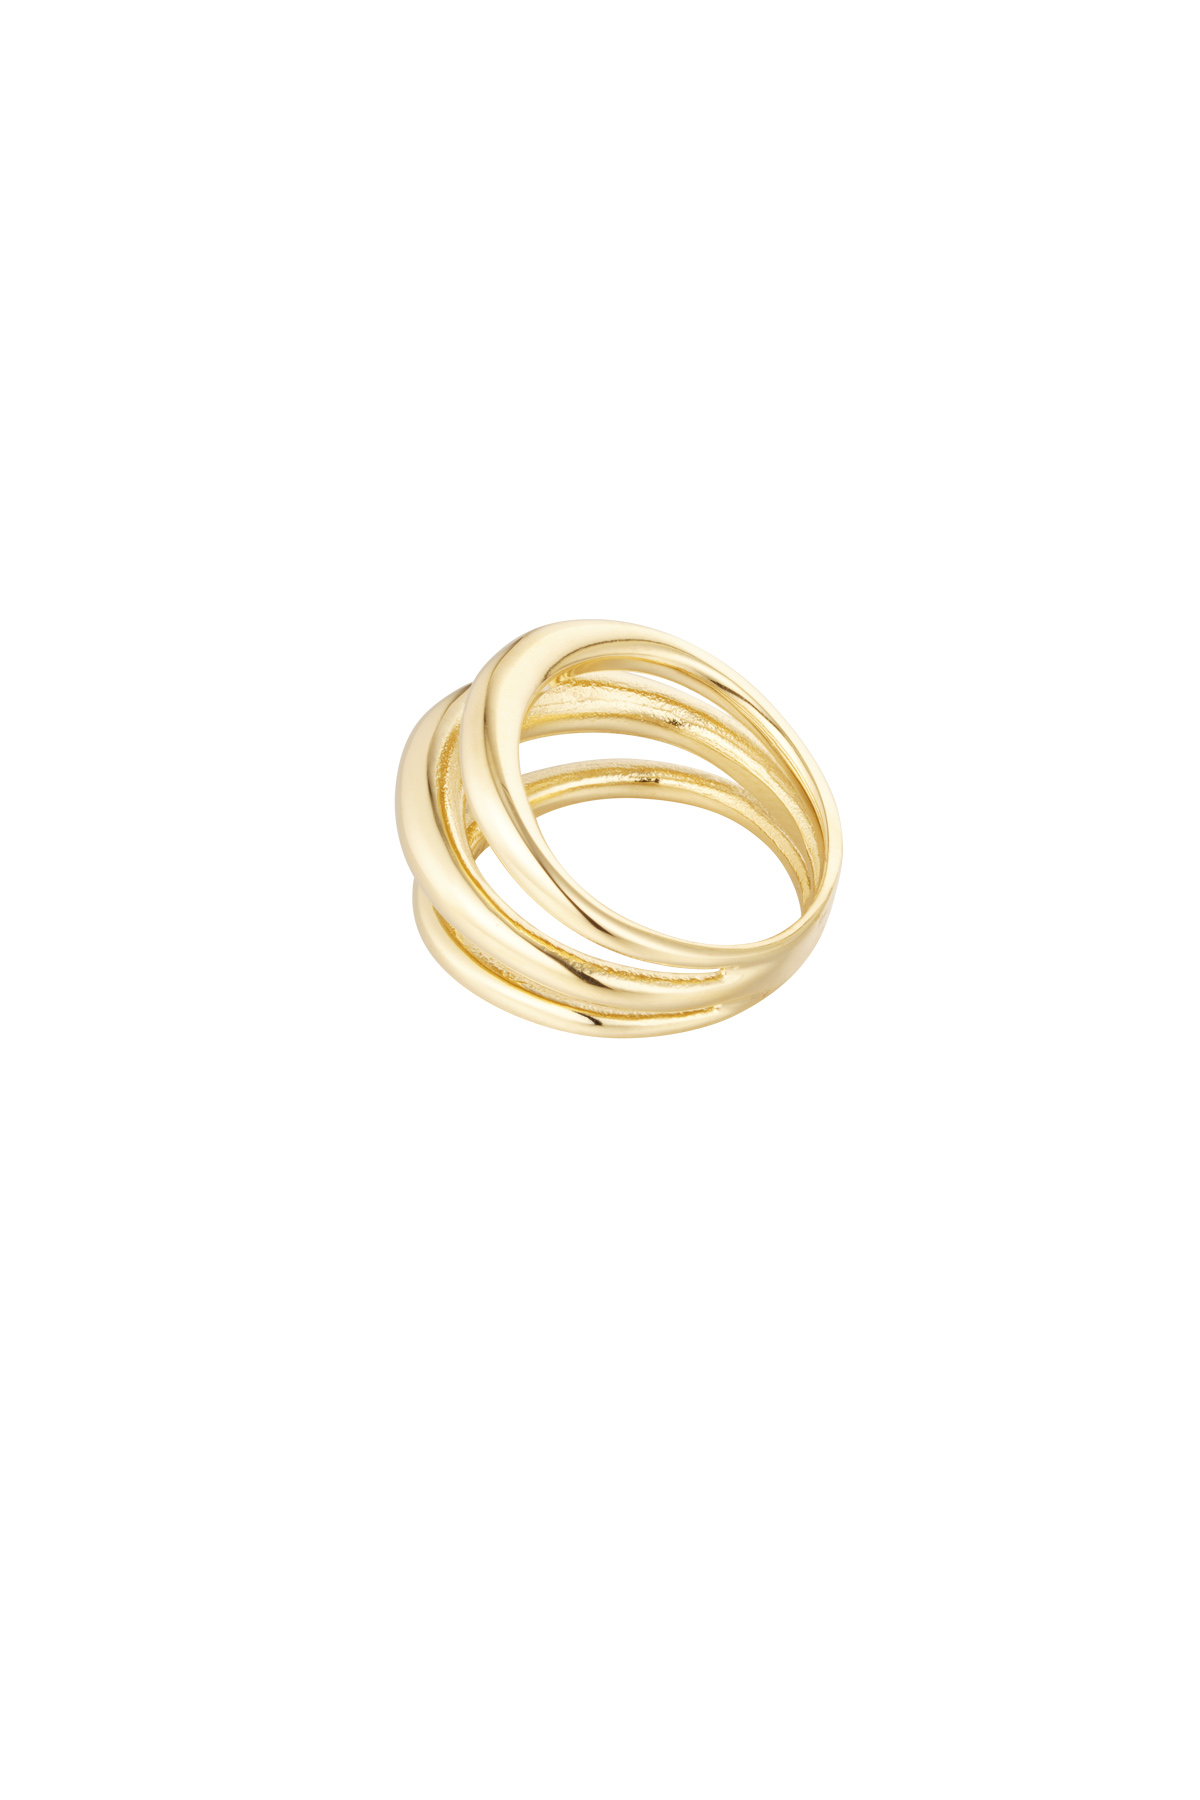 Ring three layers - gold h5 Picture3